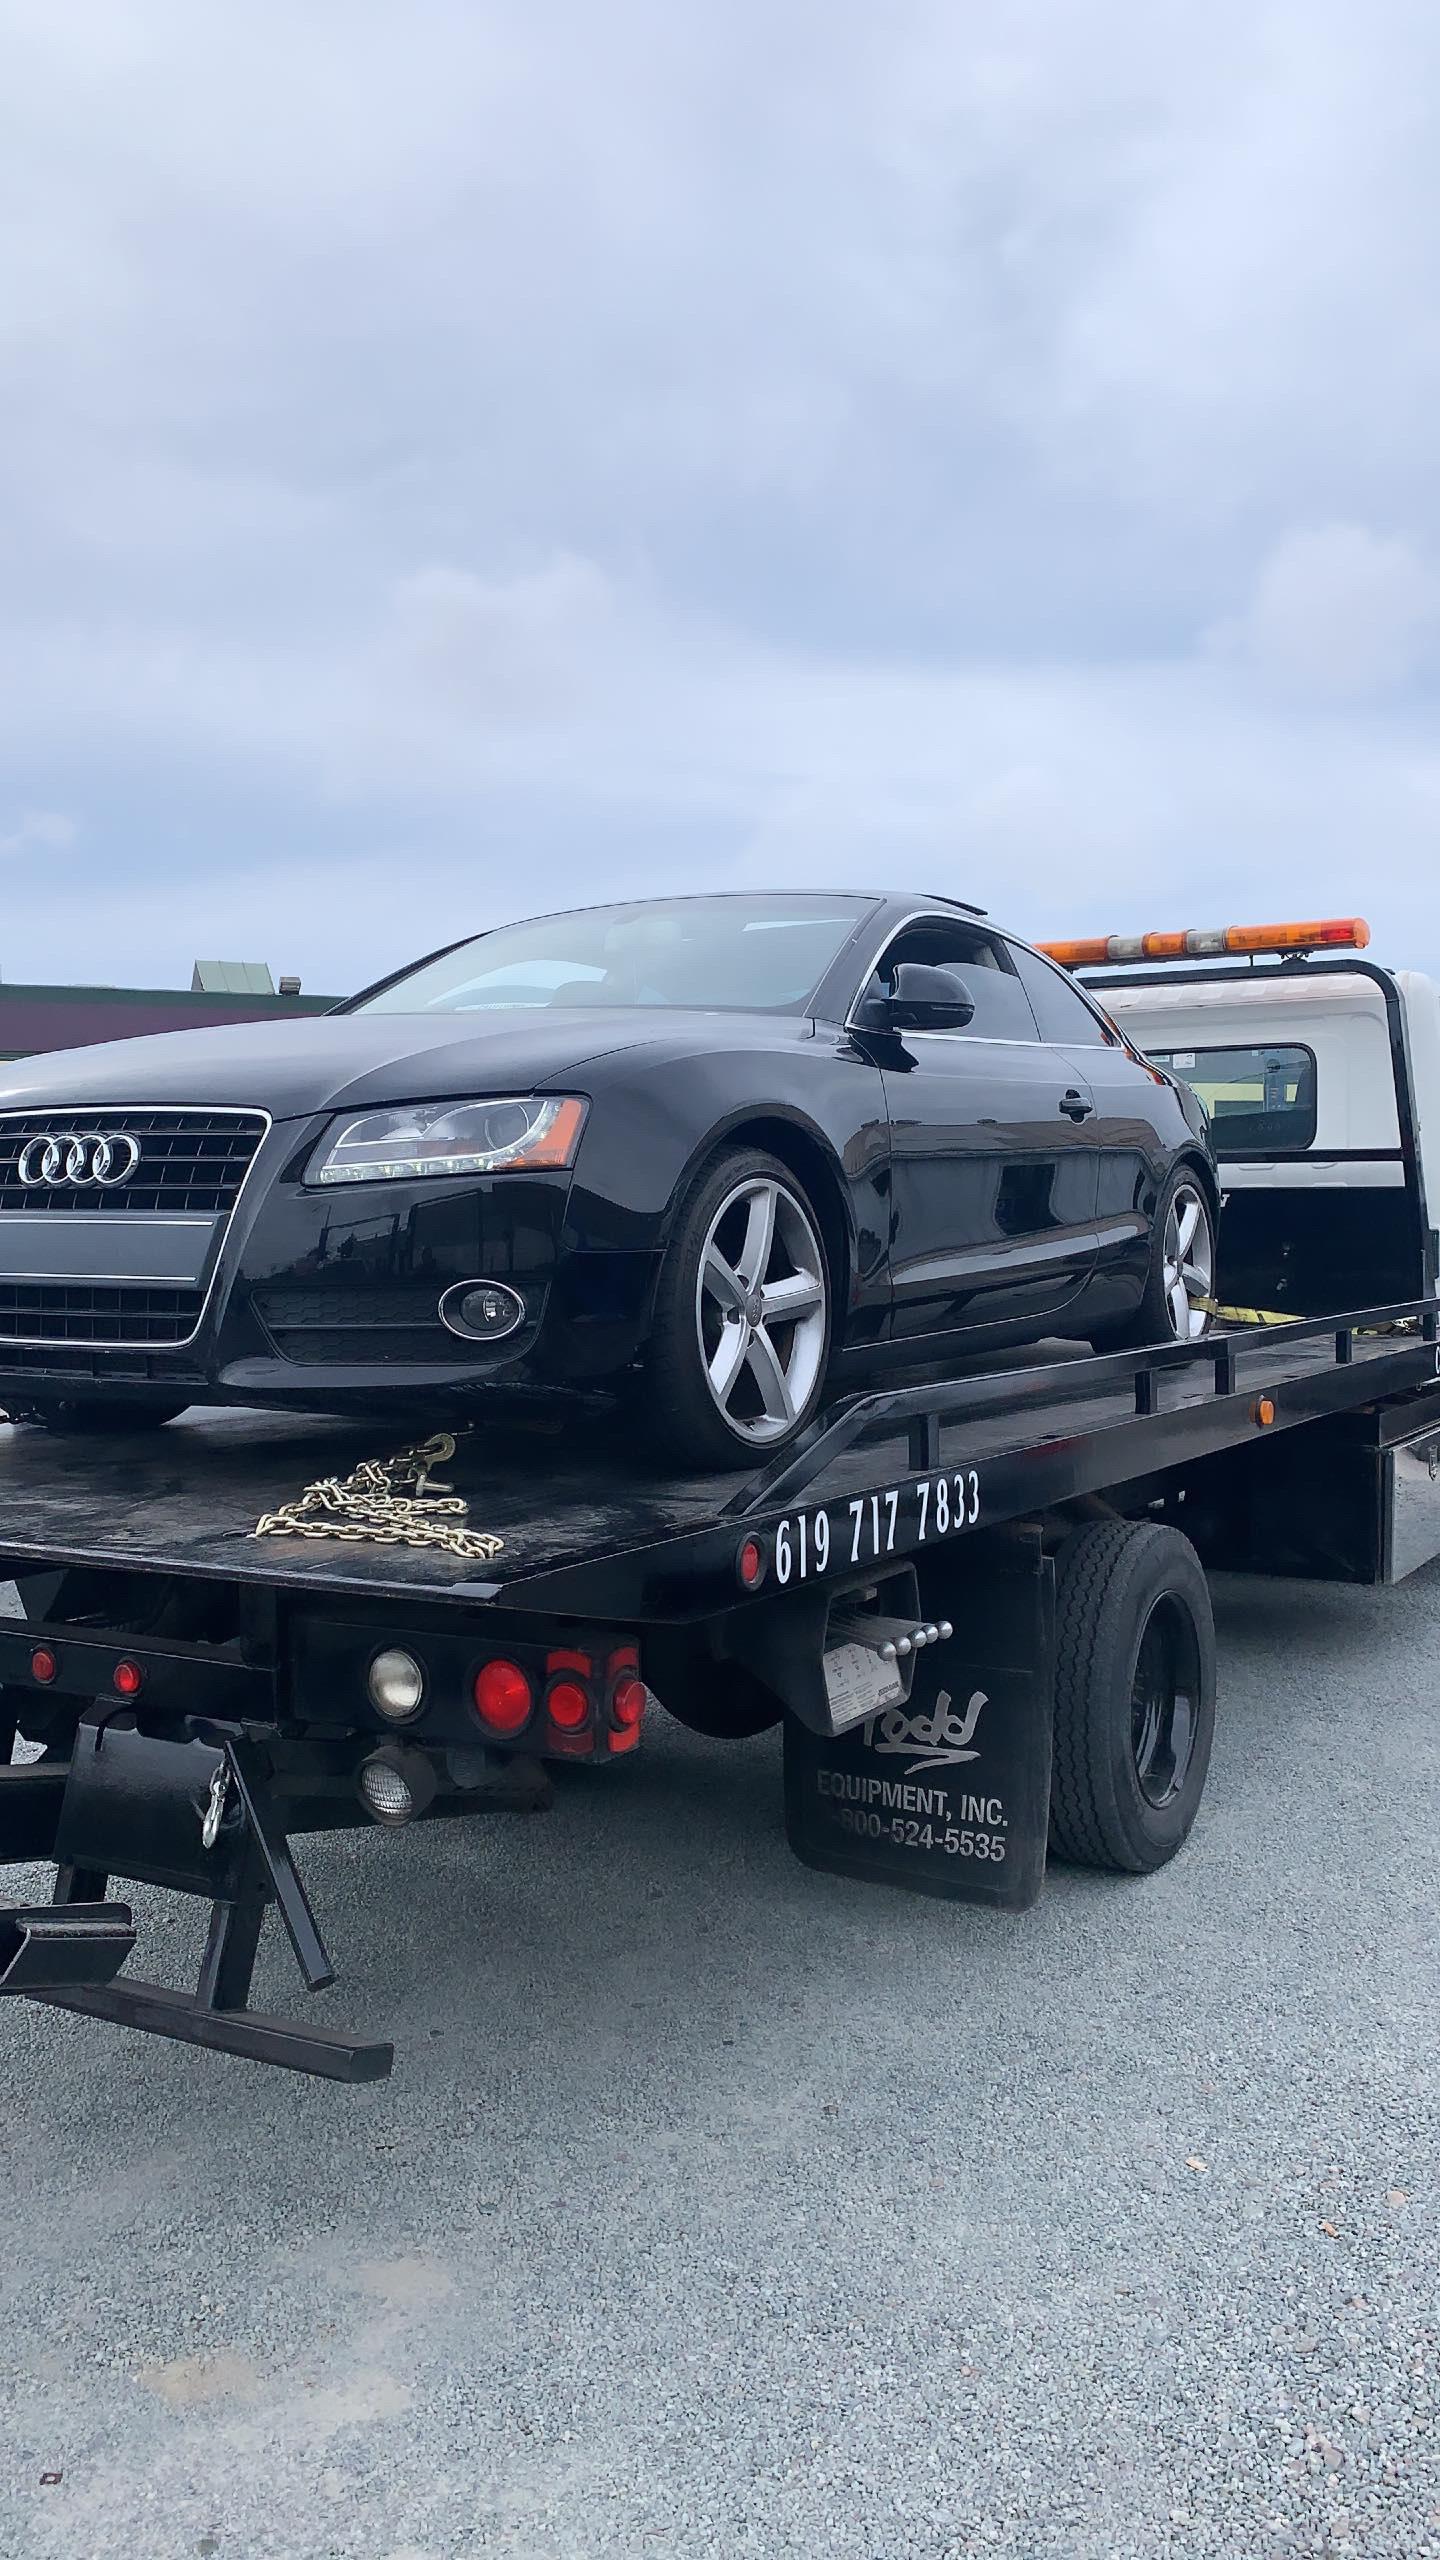 Cali Kings Towing | San Diego, CA | Accident Recovery | Emergency Roadside Assistance | Flatbed Towing